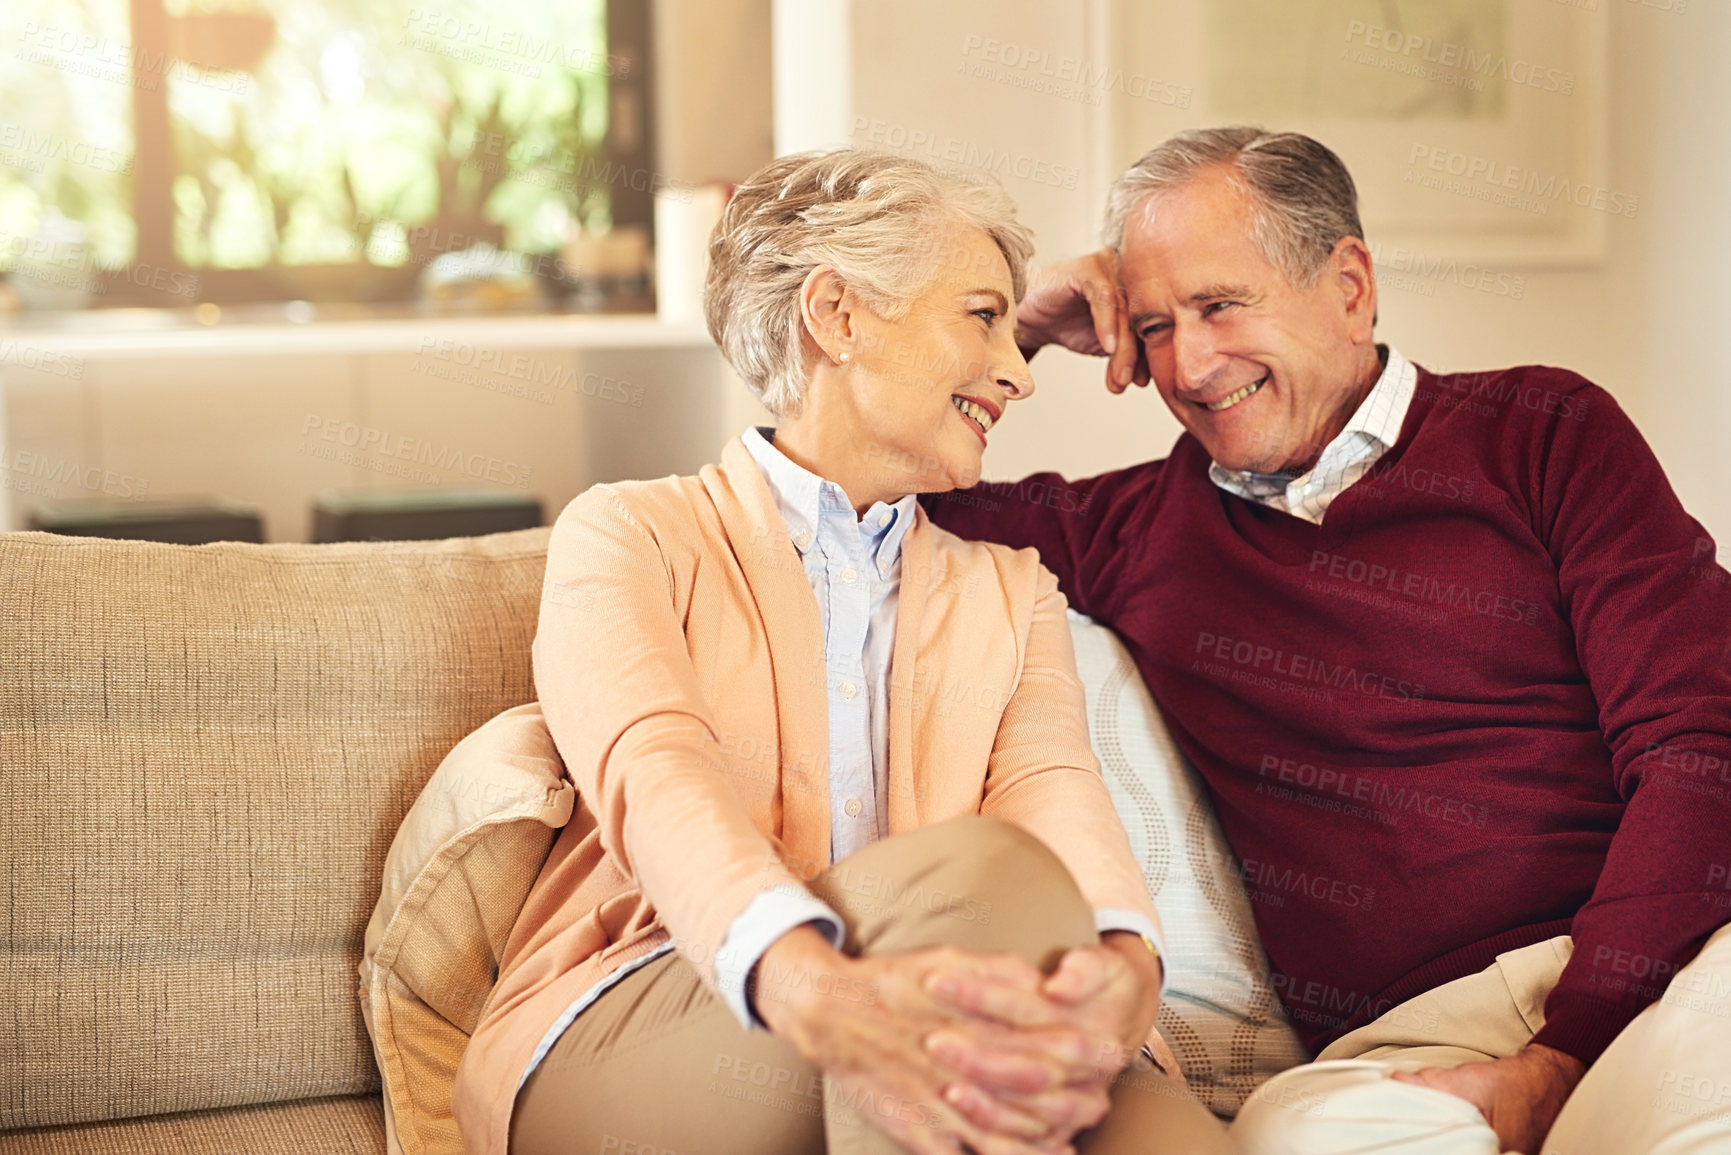 Buy stock photo Shot of a senior couple spending time together in the living room